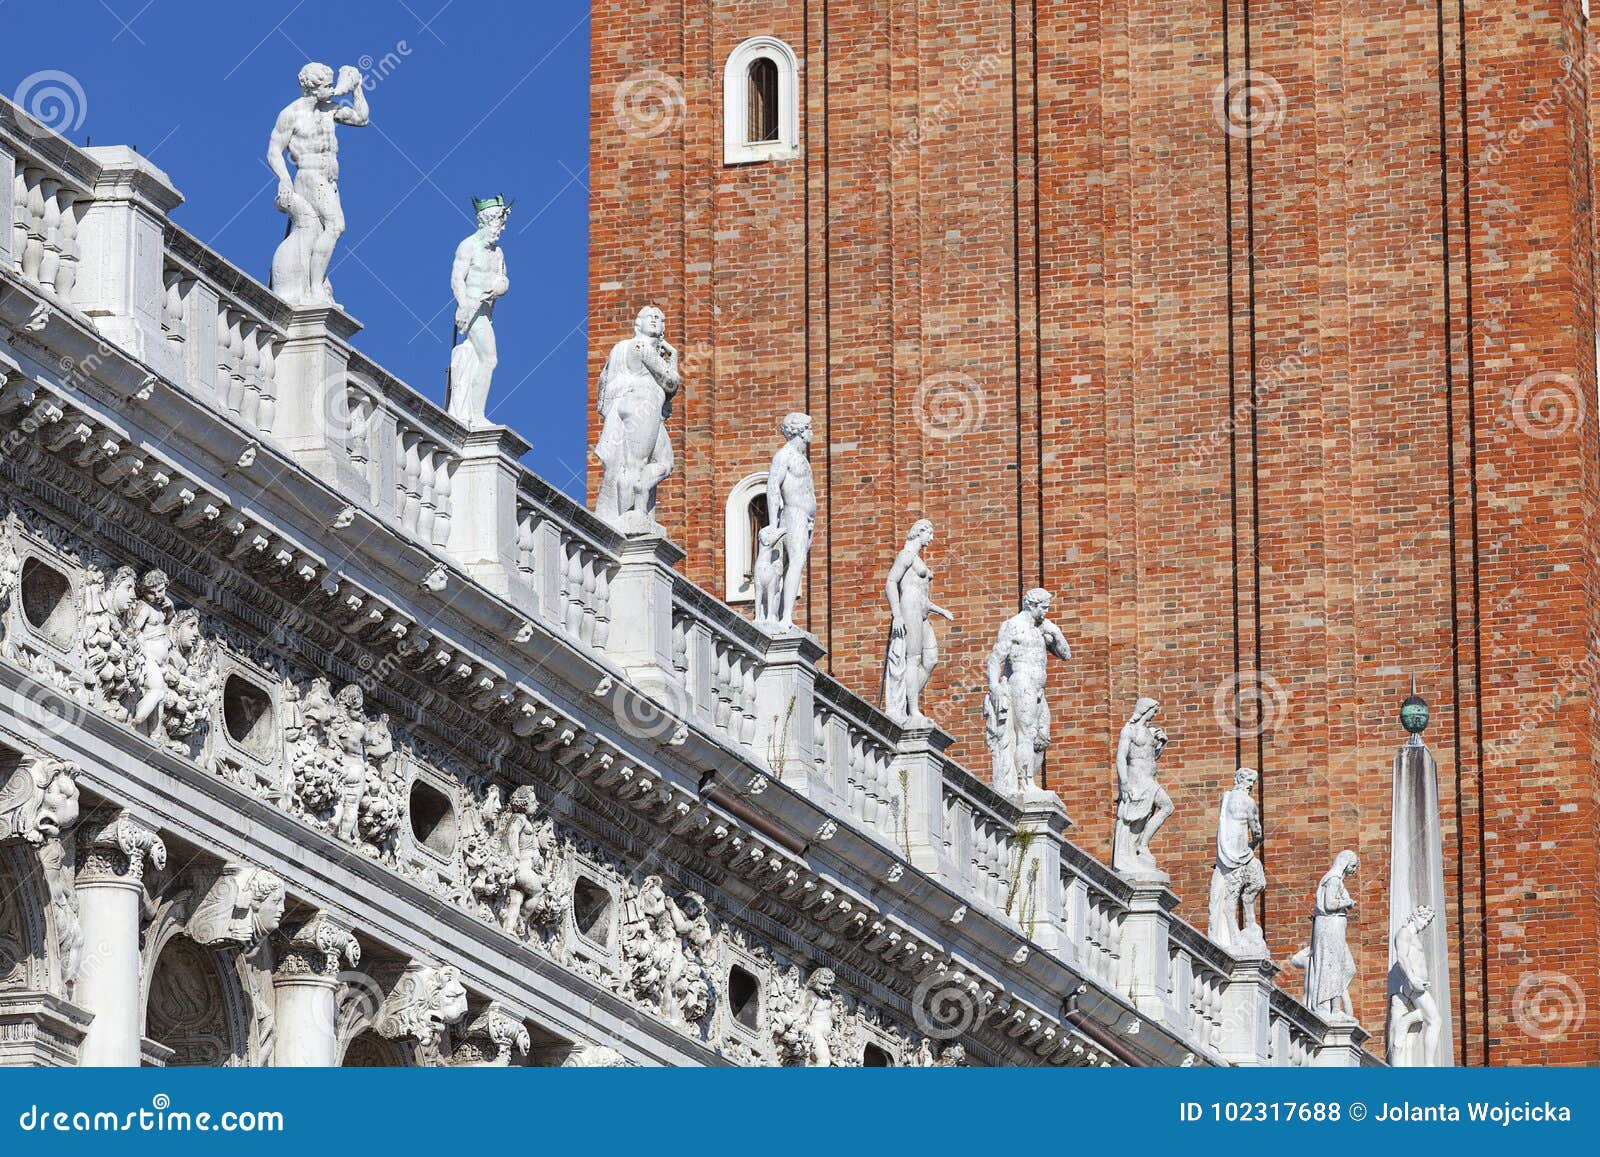 national library of st mark`s biblioteca marciana, statues at